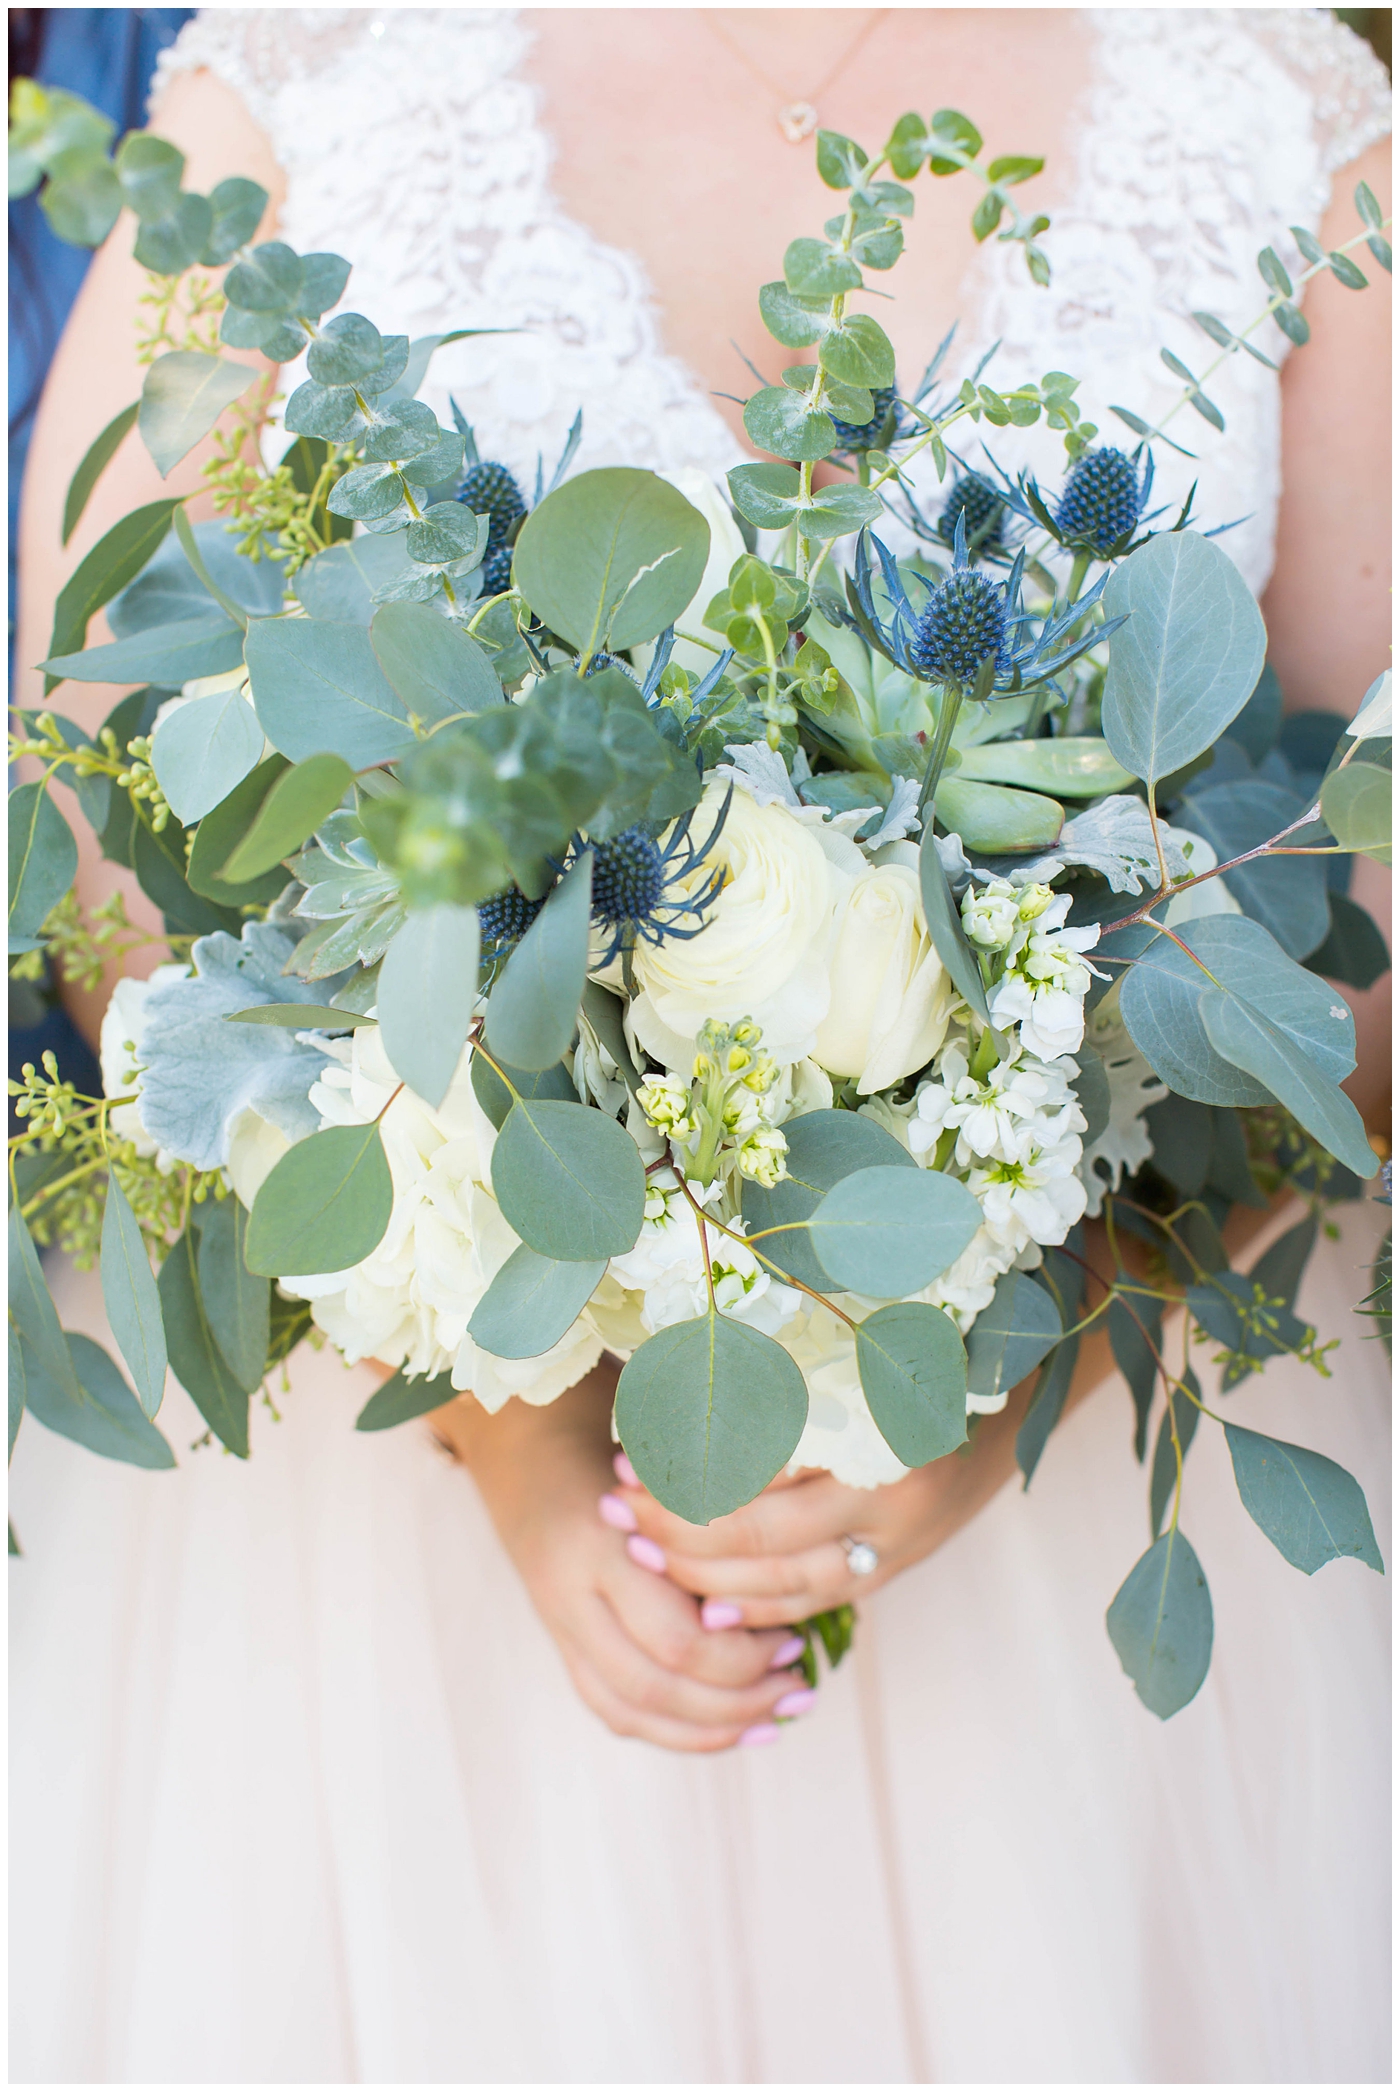 Bridal bouquet of white flowers, succulents, and greenery